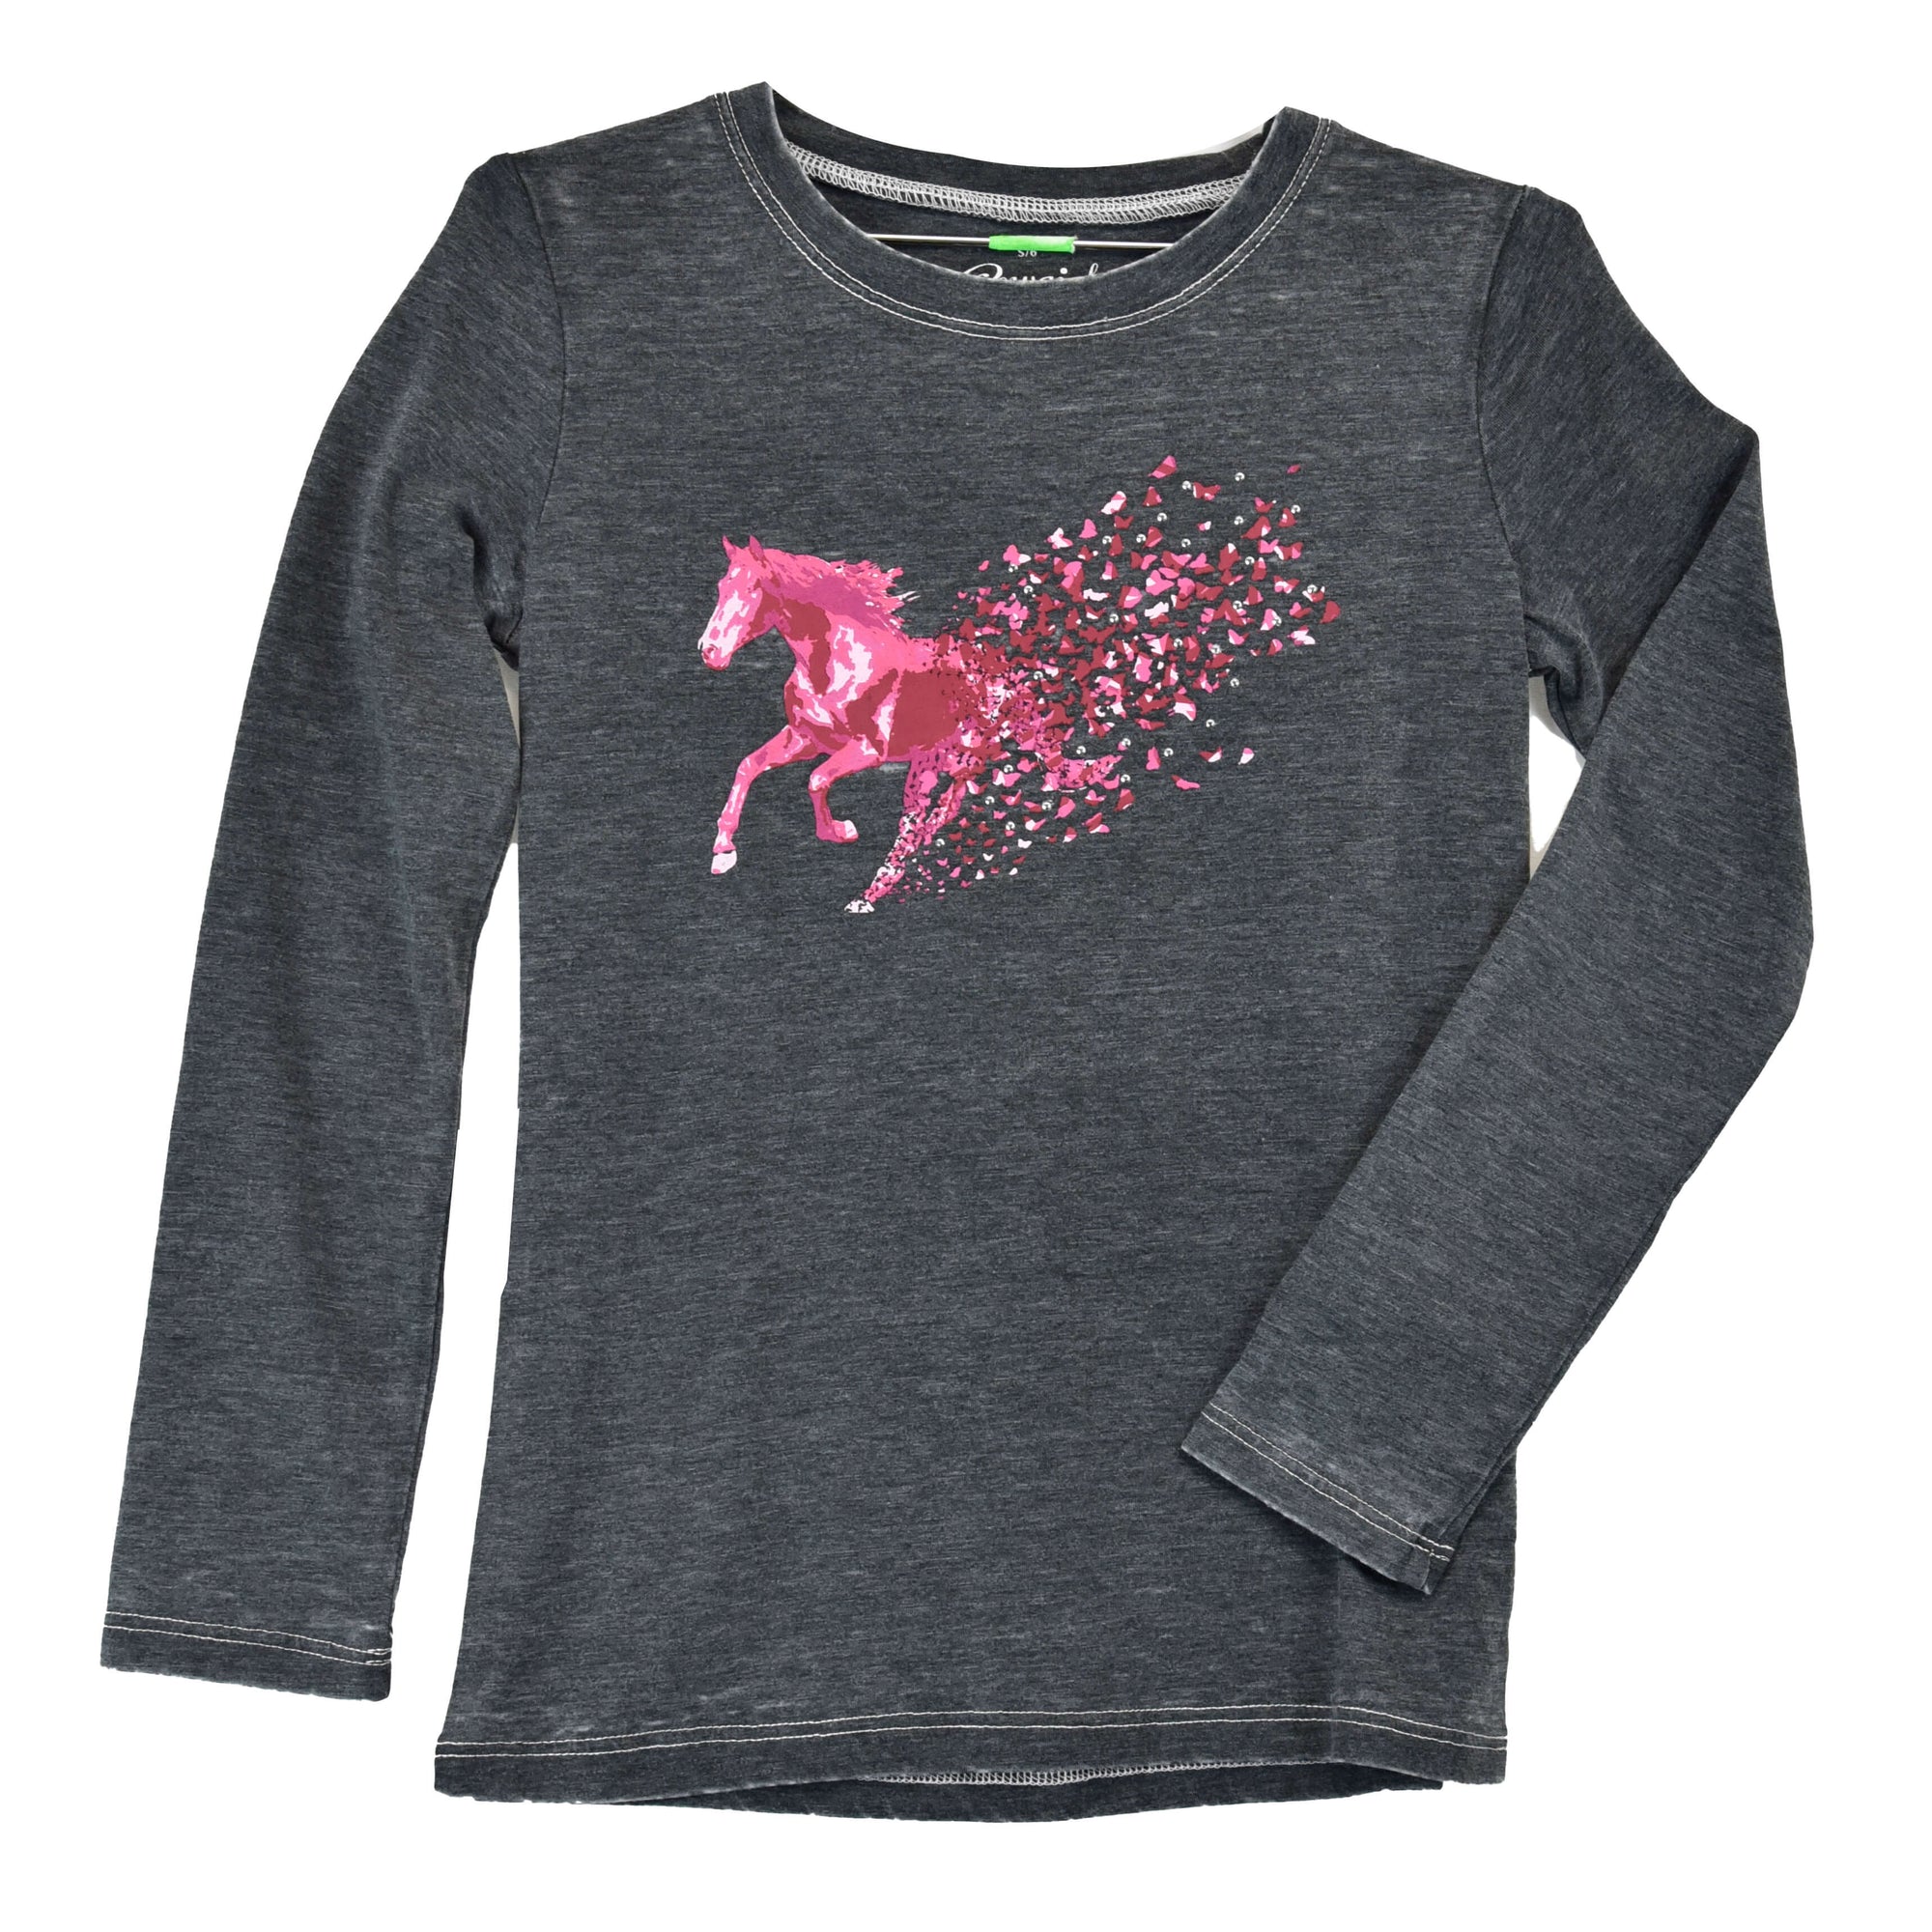 Youth Girl's Cowgirl Hardware Black Butterfly Horse Long Sleeve Tee from Cowboy Hardware